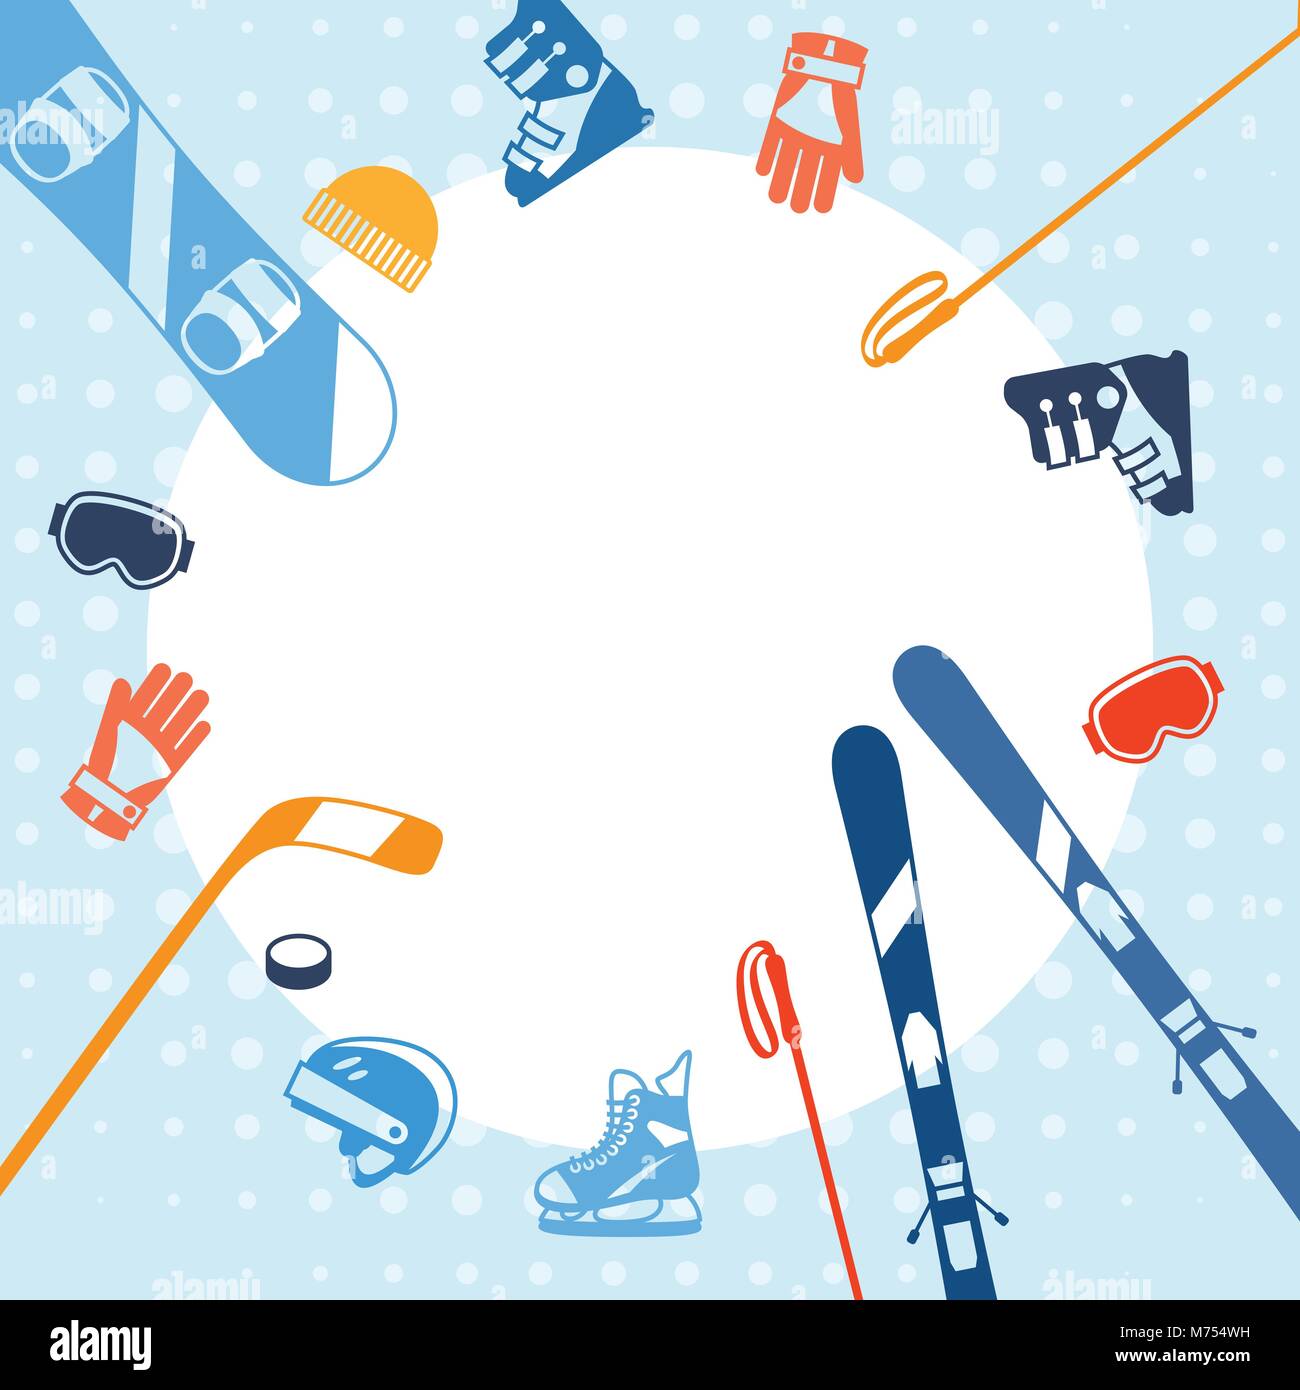 Winter sports background with equipment flat icons Stock Vector